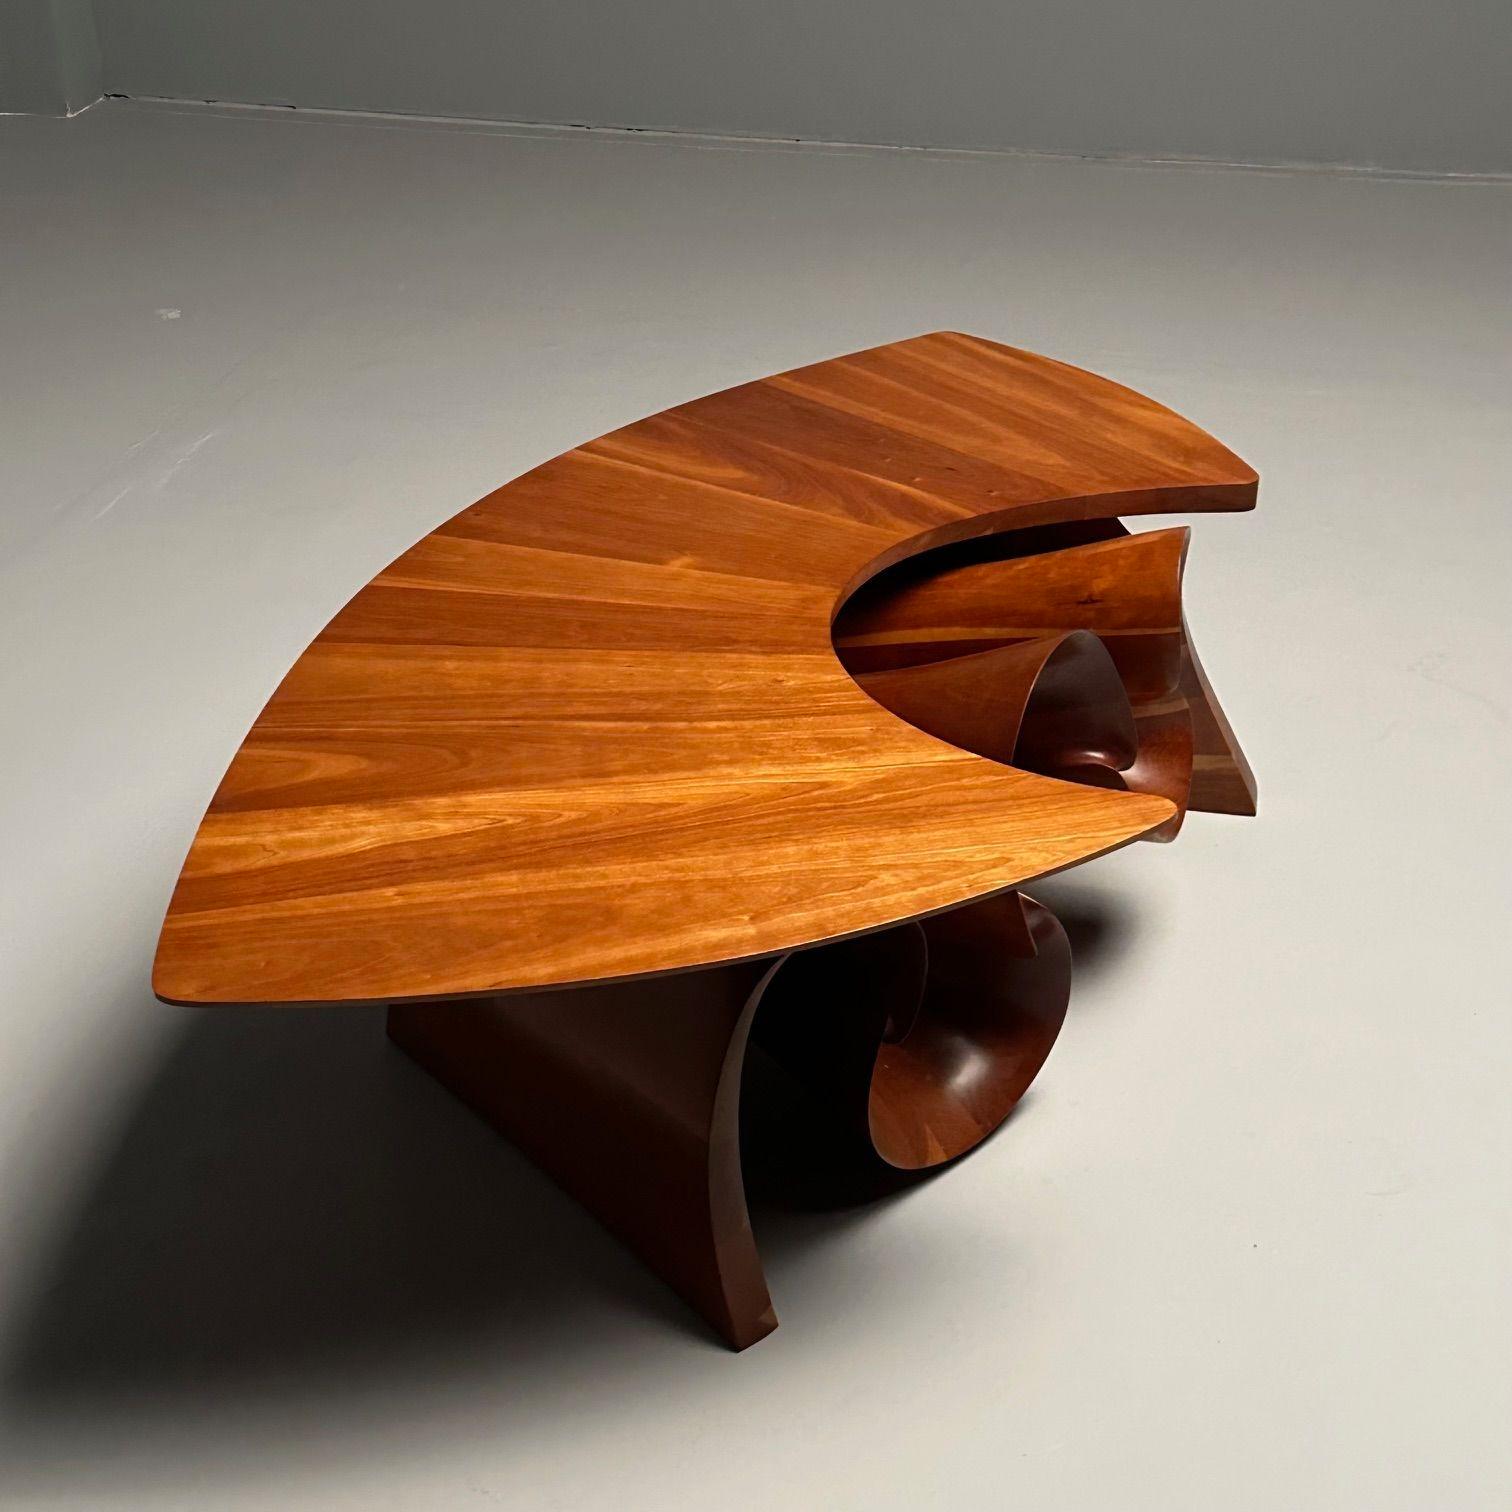 Peter Michael Adams, Mid-Century, Sculptural Coffee Table, Walnut, USA, 1970s For Sale 1